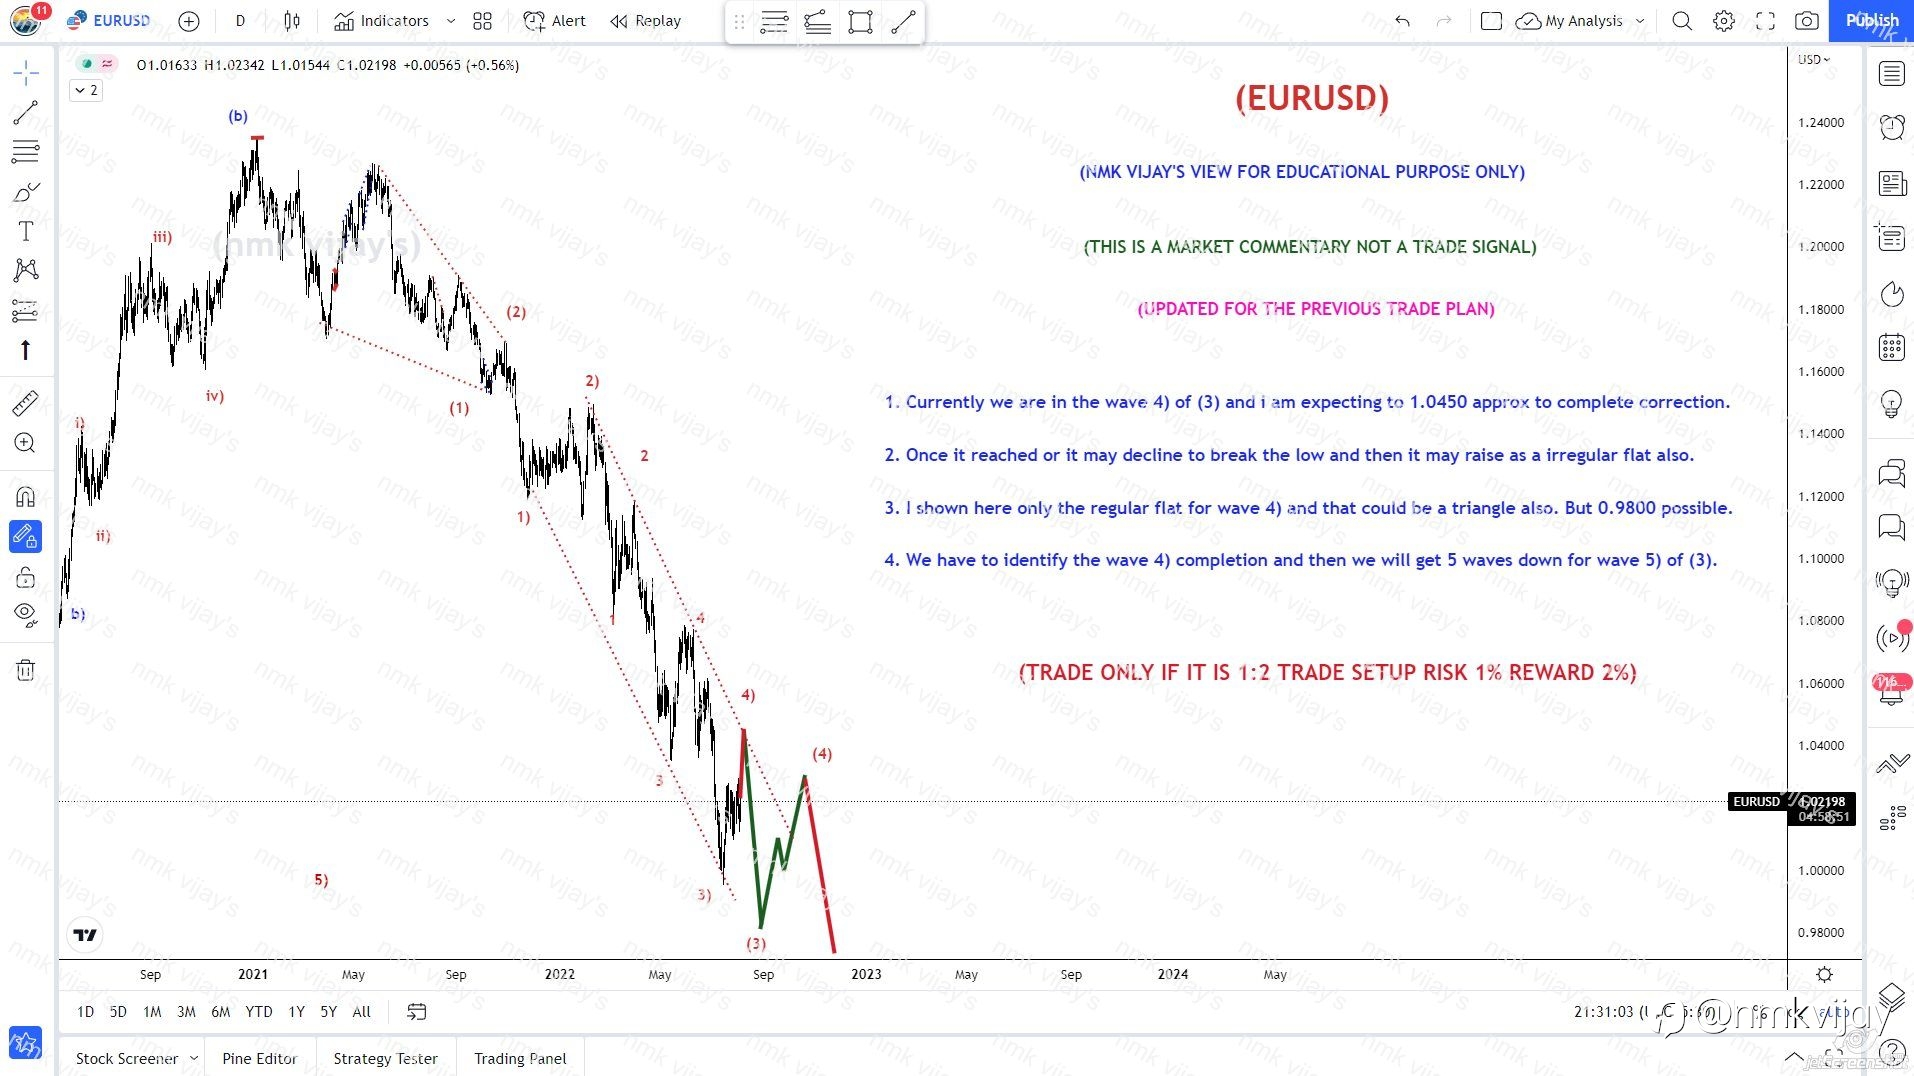 EURUSD-Expecting to reach 1.0450 for wave 4) of (3) to complete.